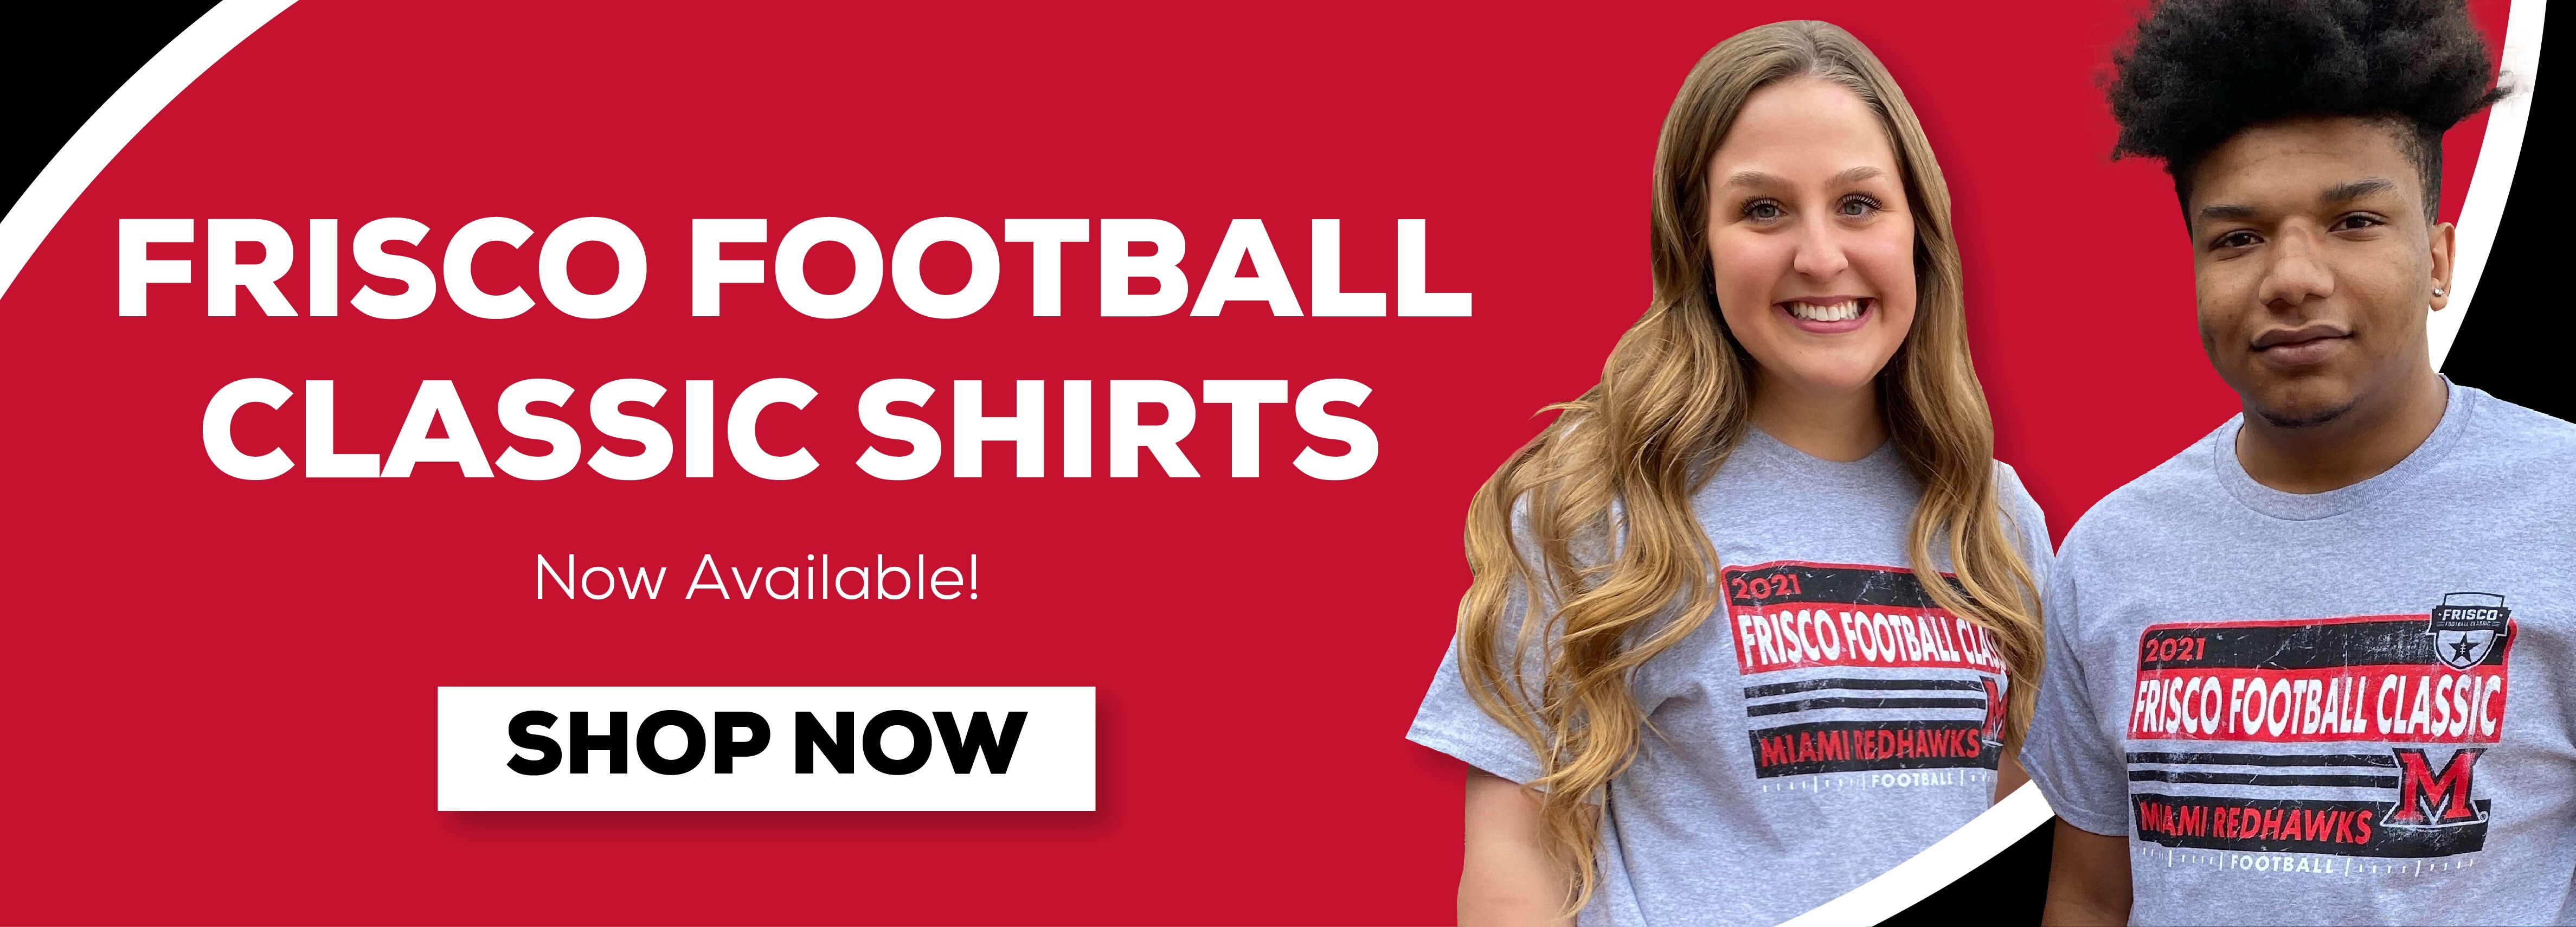 Frisco Football Classic Shirts Now Available! Shop Now